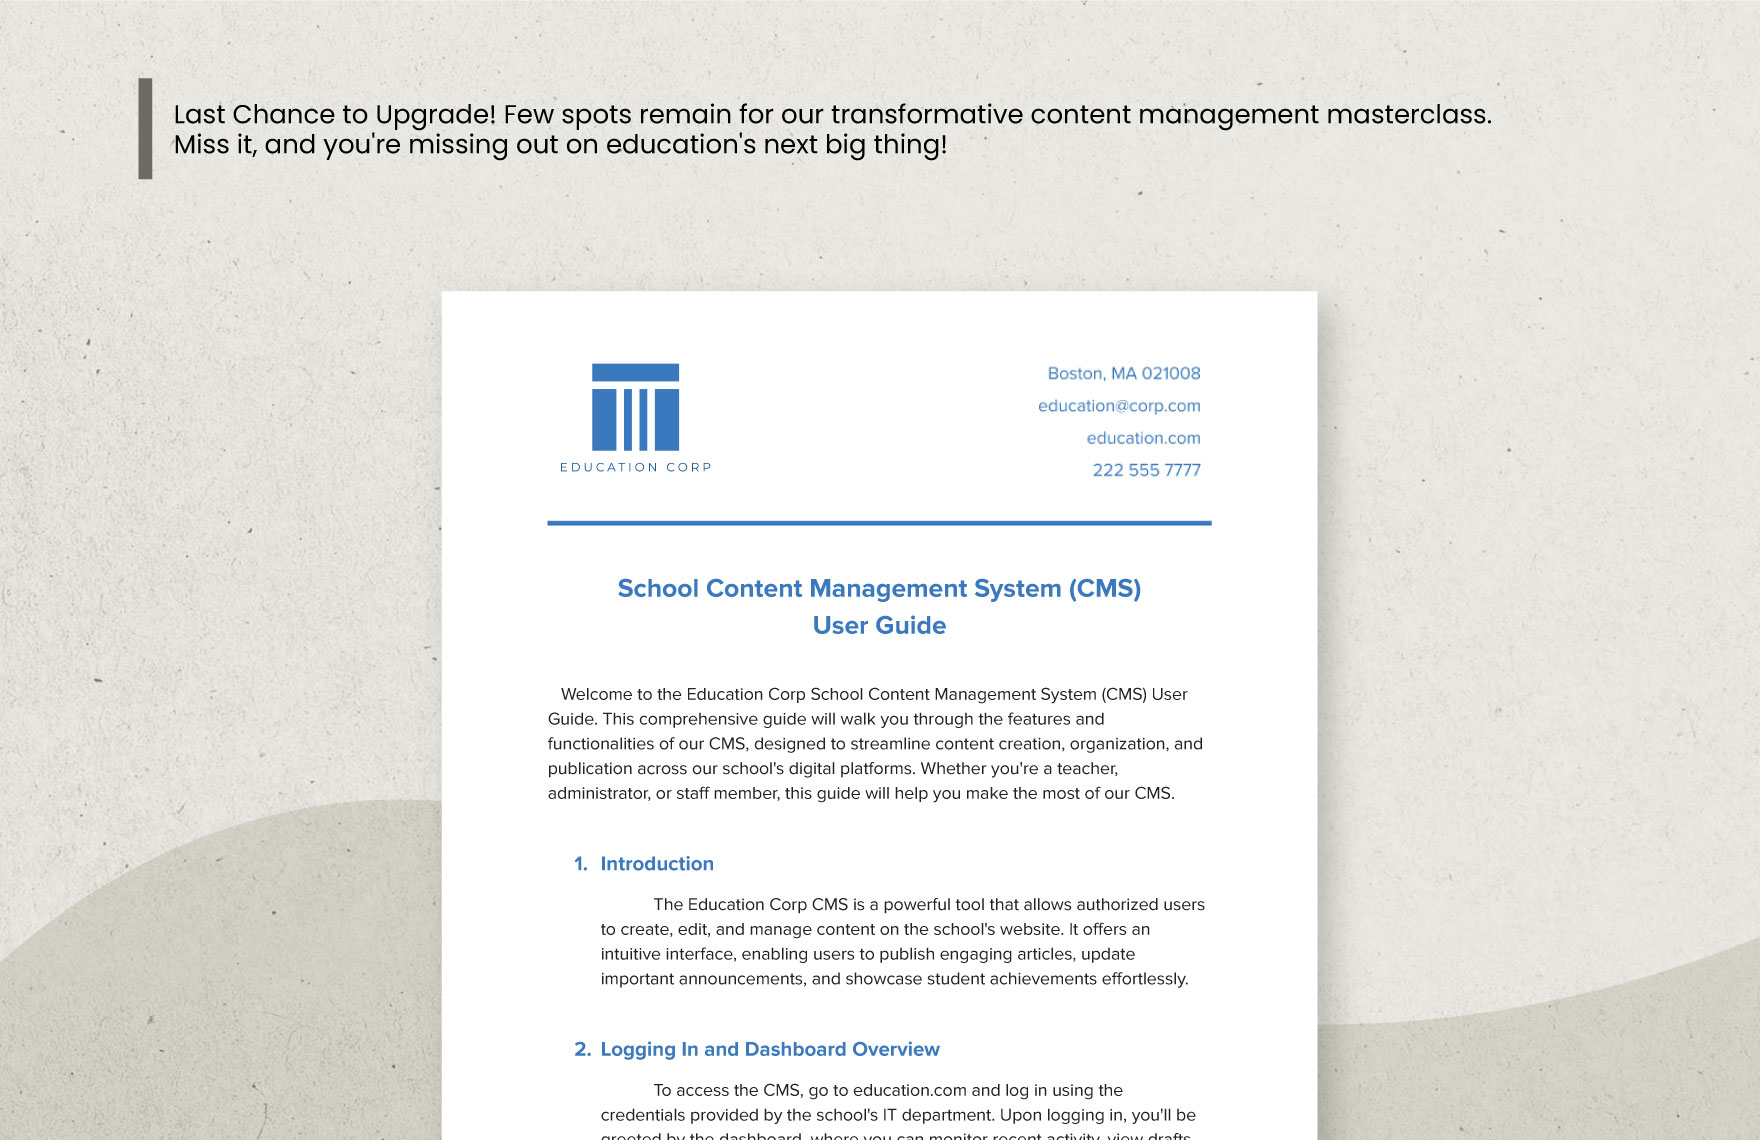 School Content Management System (CMS) User Guide Template